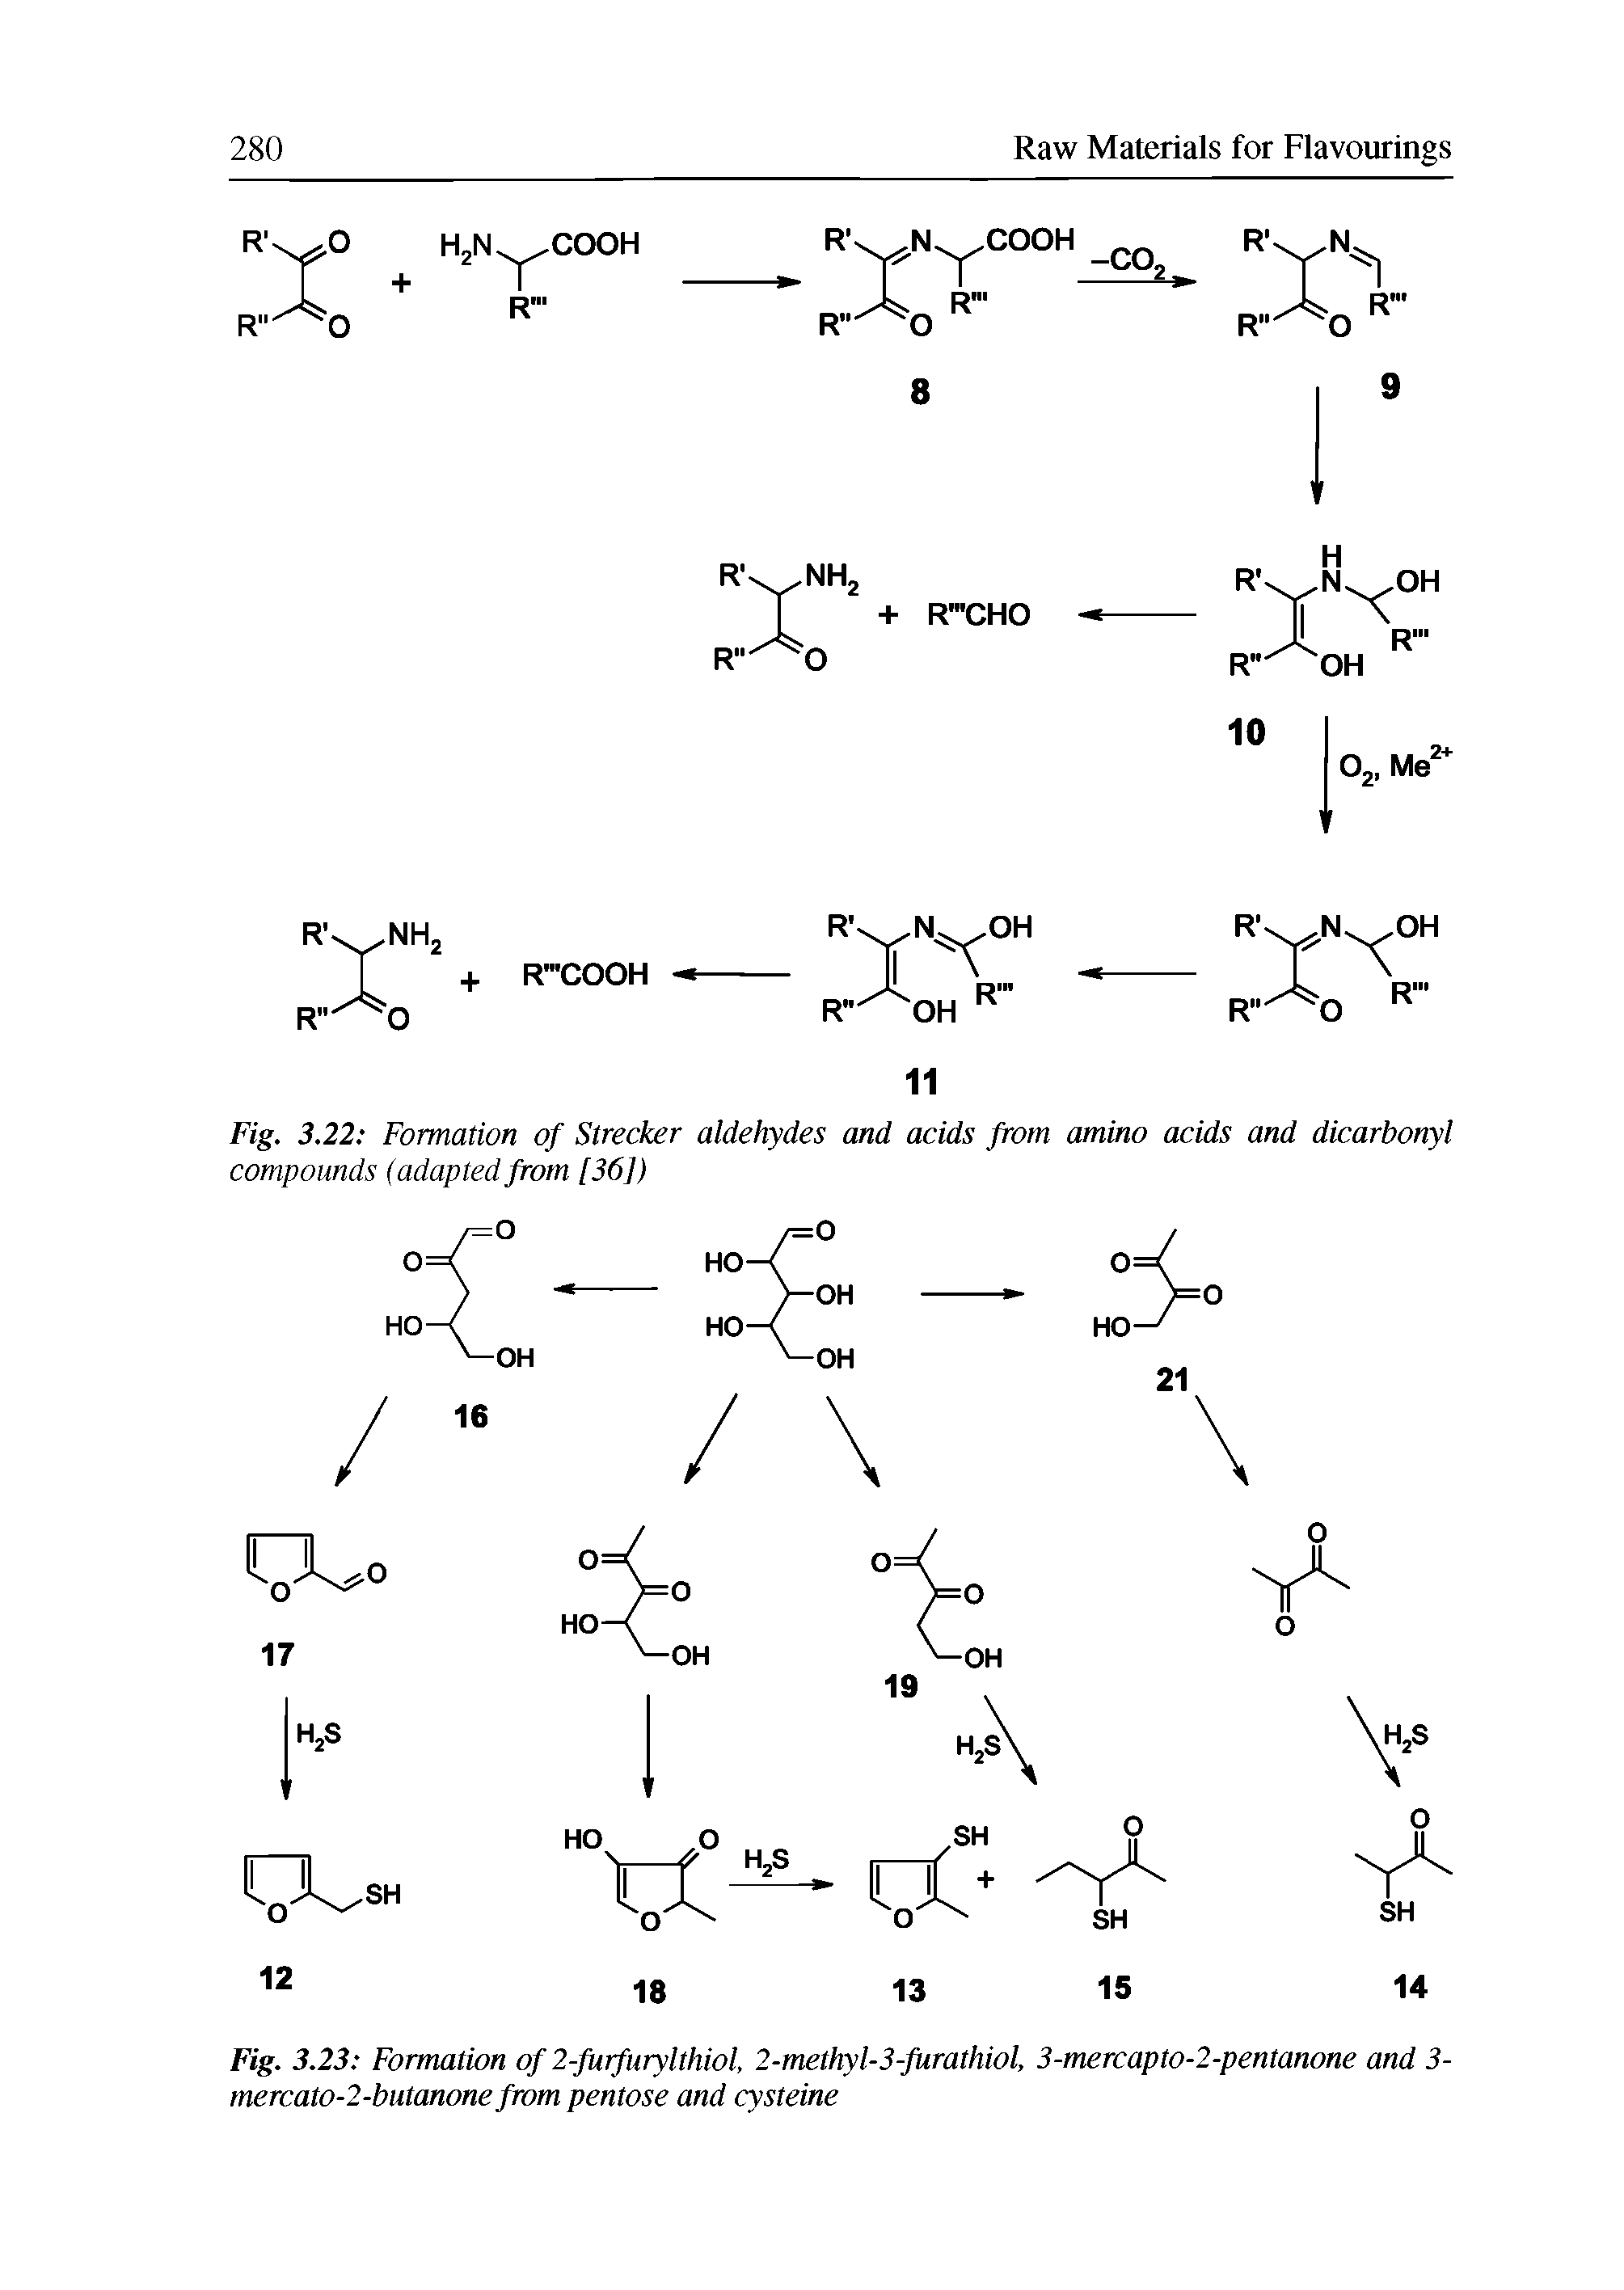 Fig. 3.23 Formation of 2-furfurylthiol, 2-methyl-3-furathiol, 3-mercapto-2-pentanone and 3-mercato-2-butanone from pentose and cysteine...